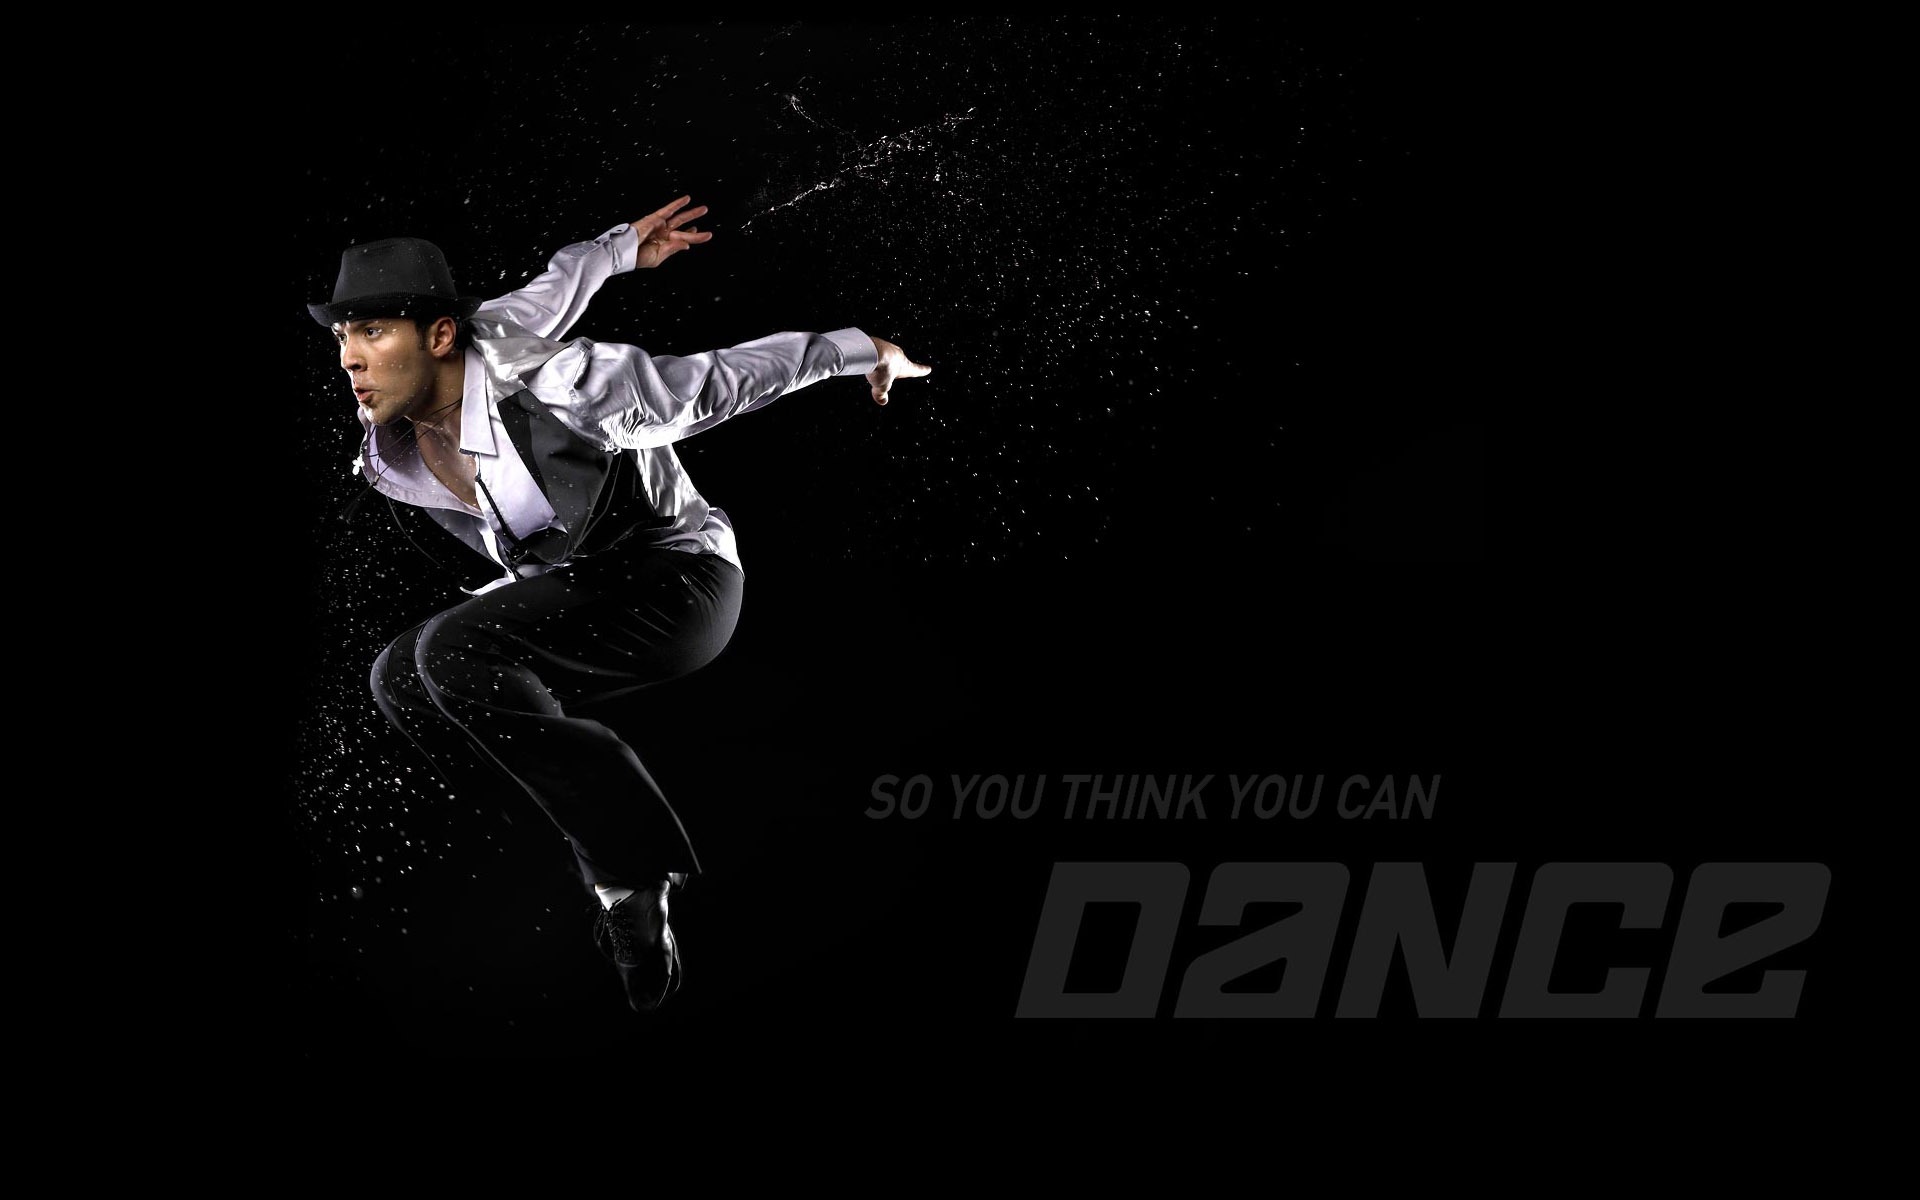 So You Think You Can Dance 舞林争霸 壁纸(一)12 - 1920x1200